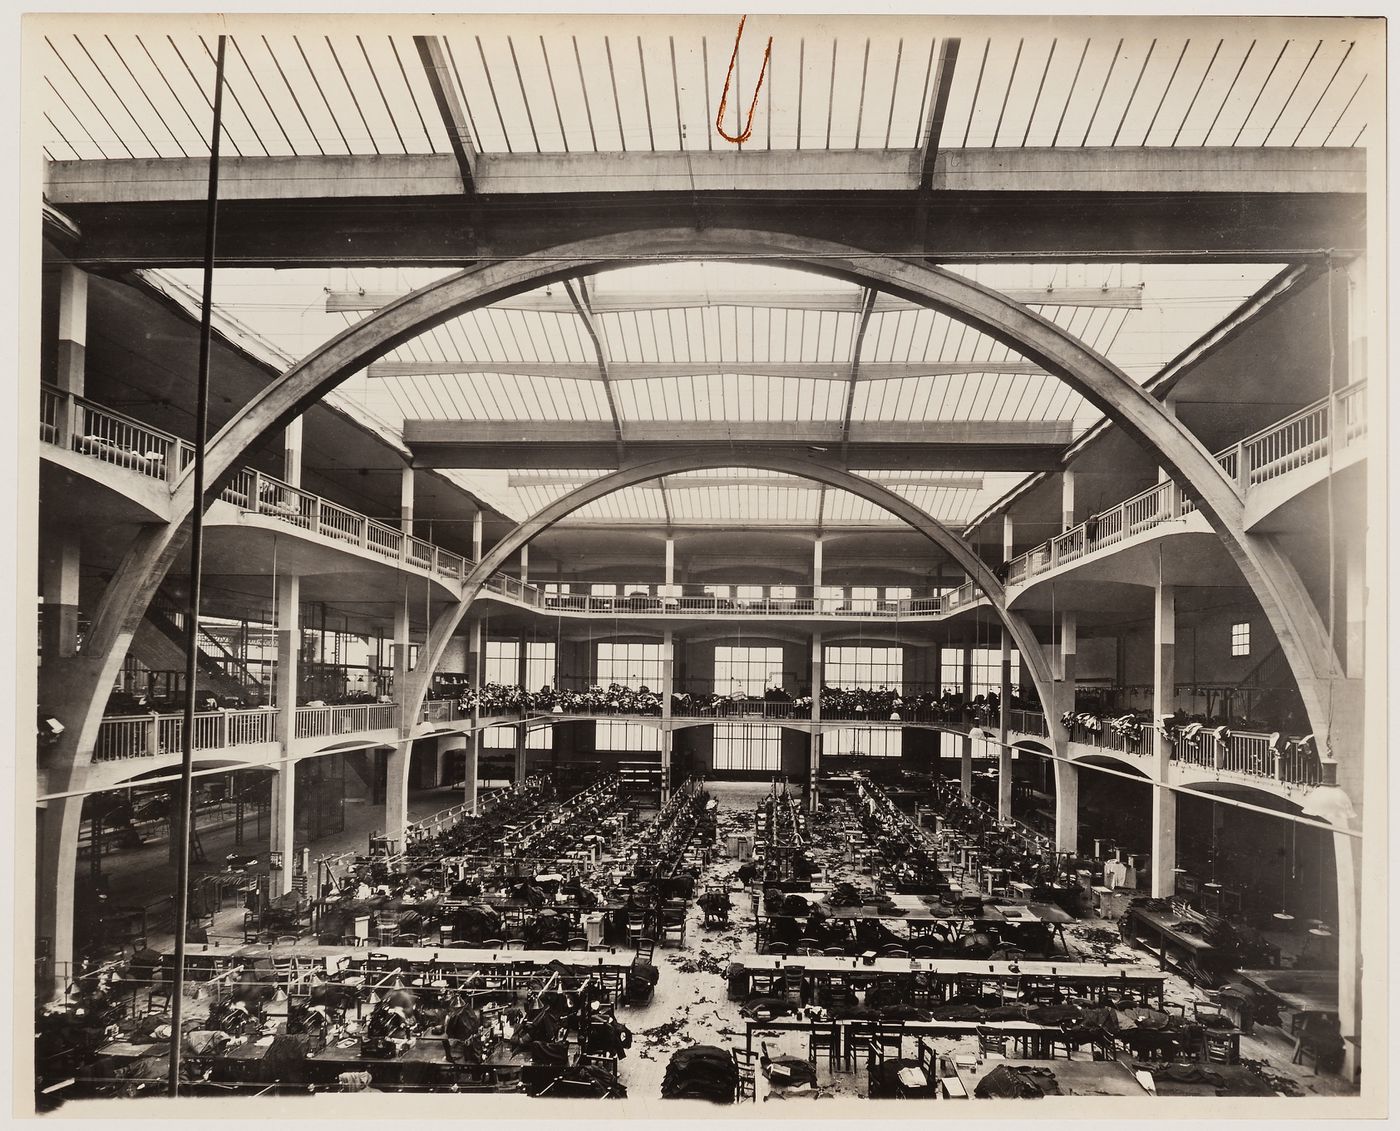 Interior view of the 'Ateliers Esders', garment factory, Paris, France